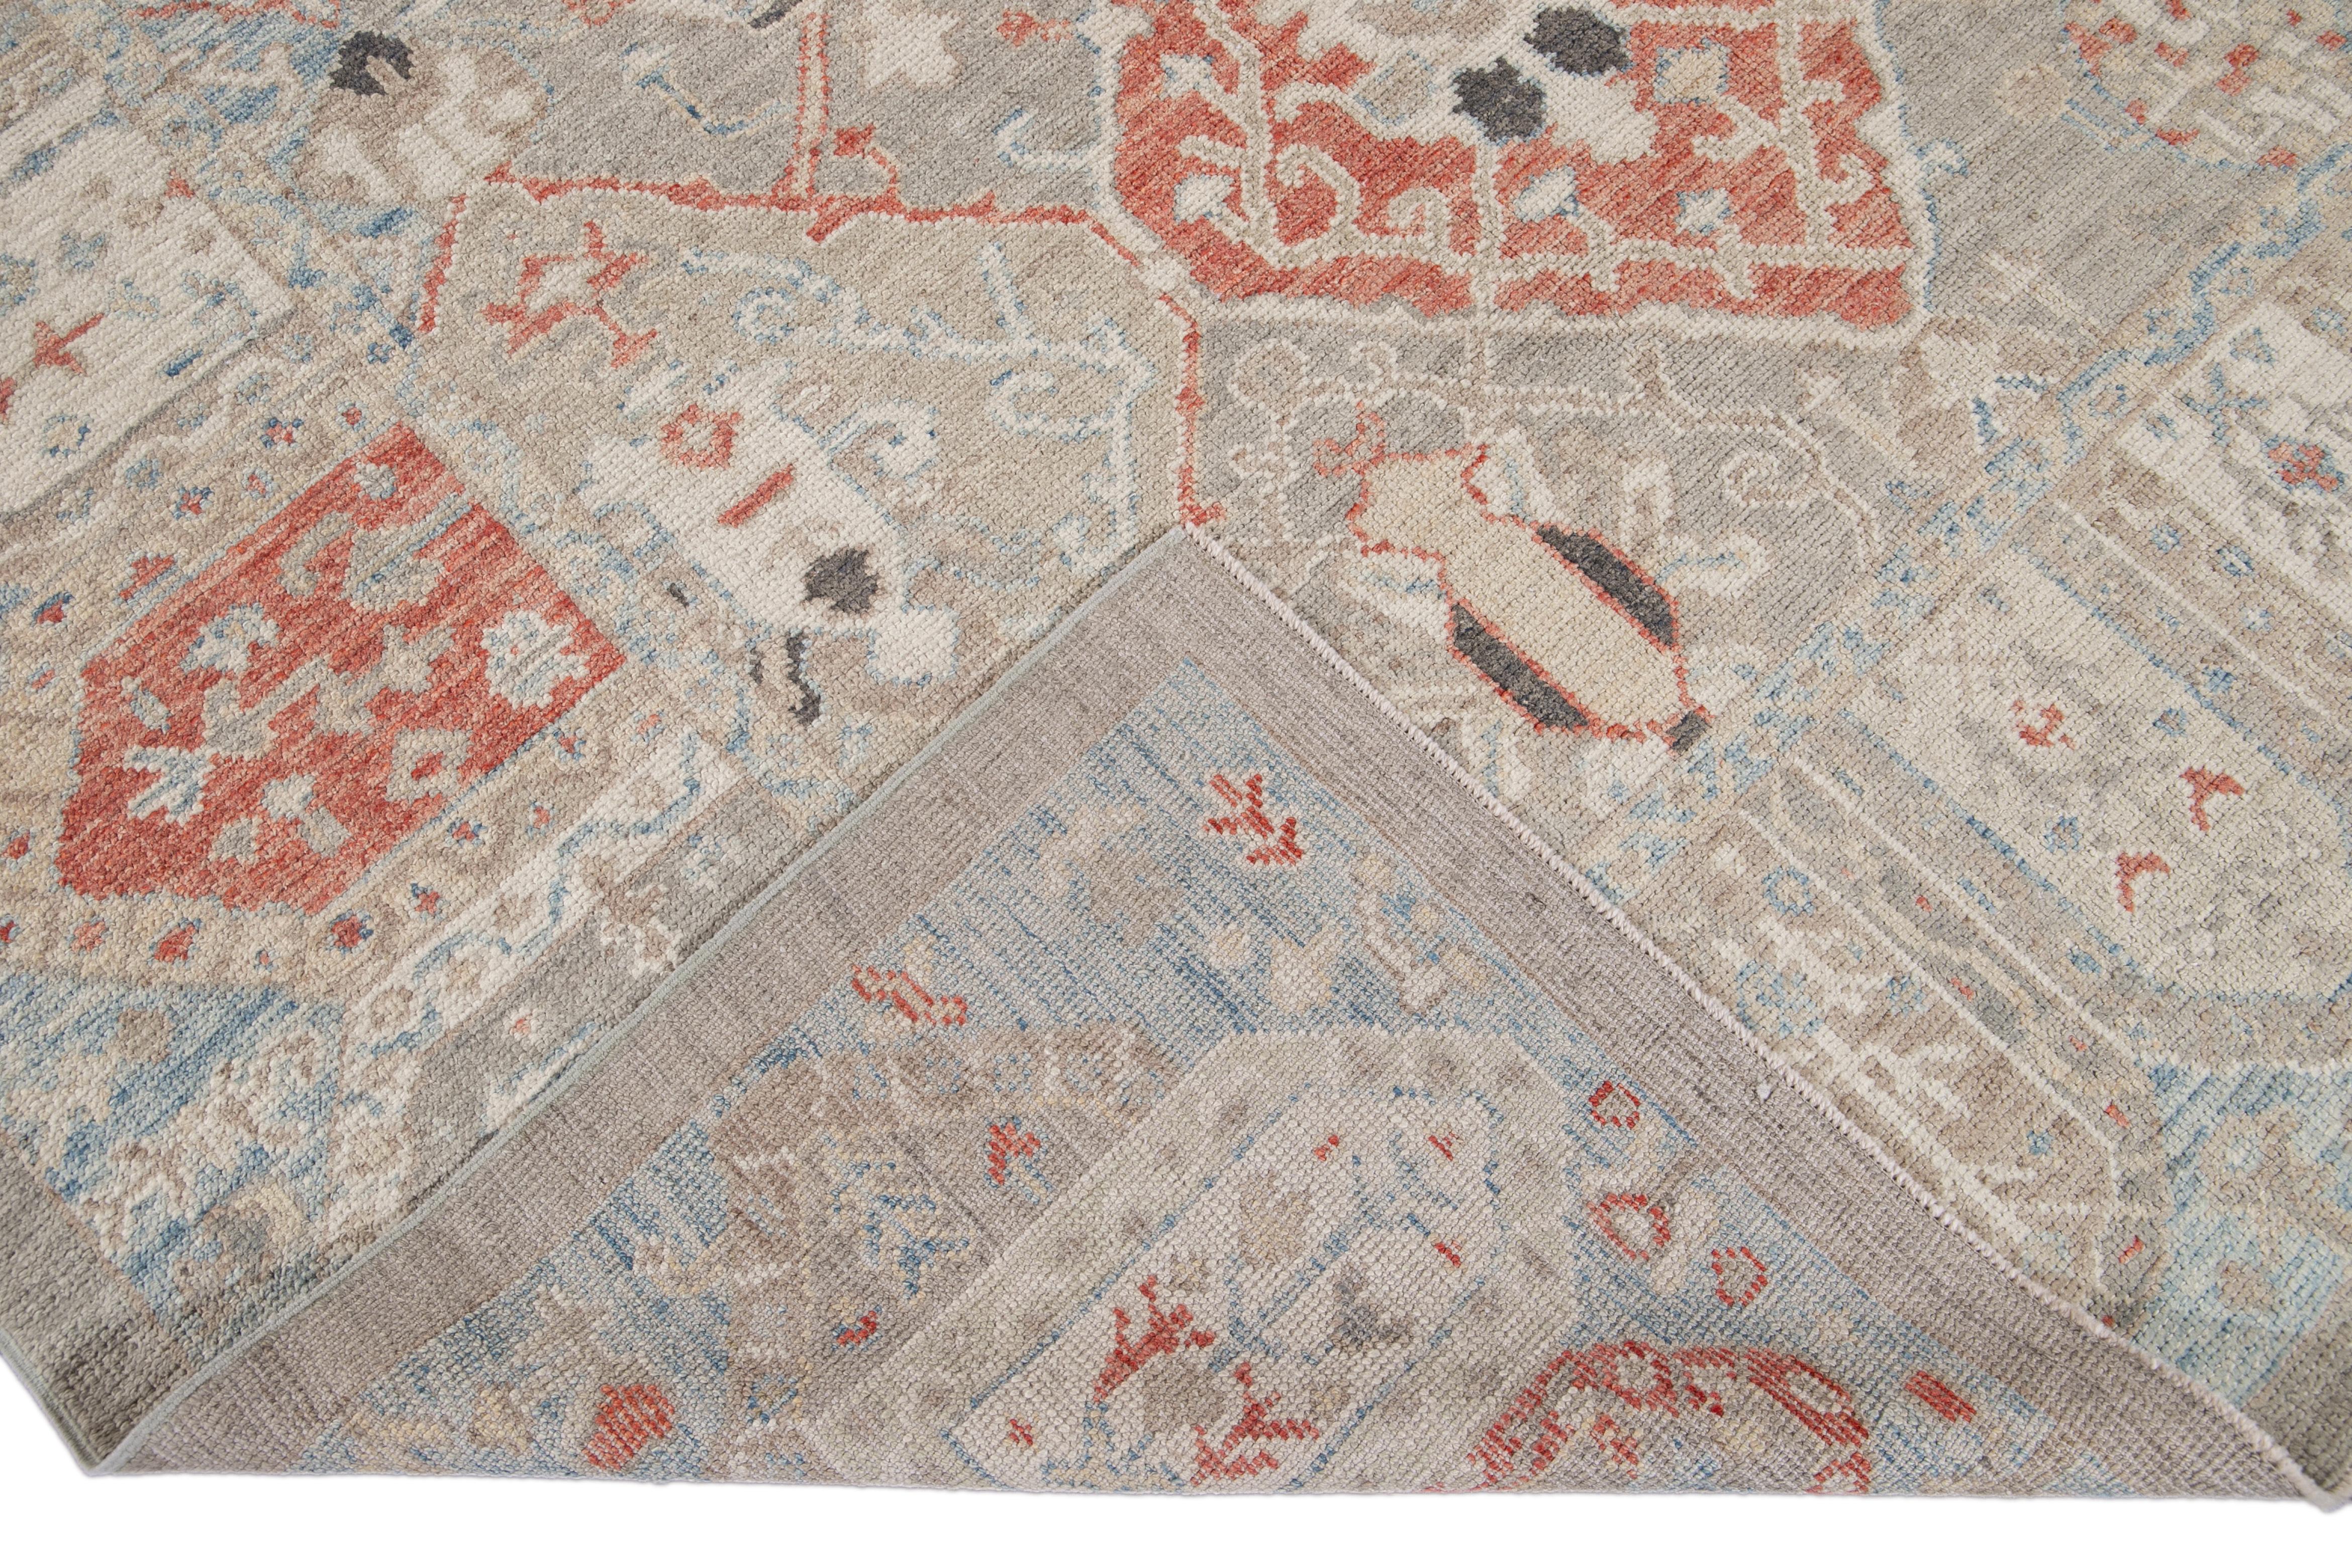 Beautiful modern Oushak hand knotted wool rug with a gray and beige field. This Oushak rug has orange, beige, blue, and ivory accents all-over a gorgeous geometric medallion floral design.

This rug measures 8'5